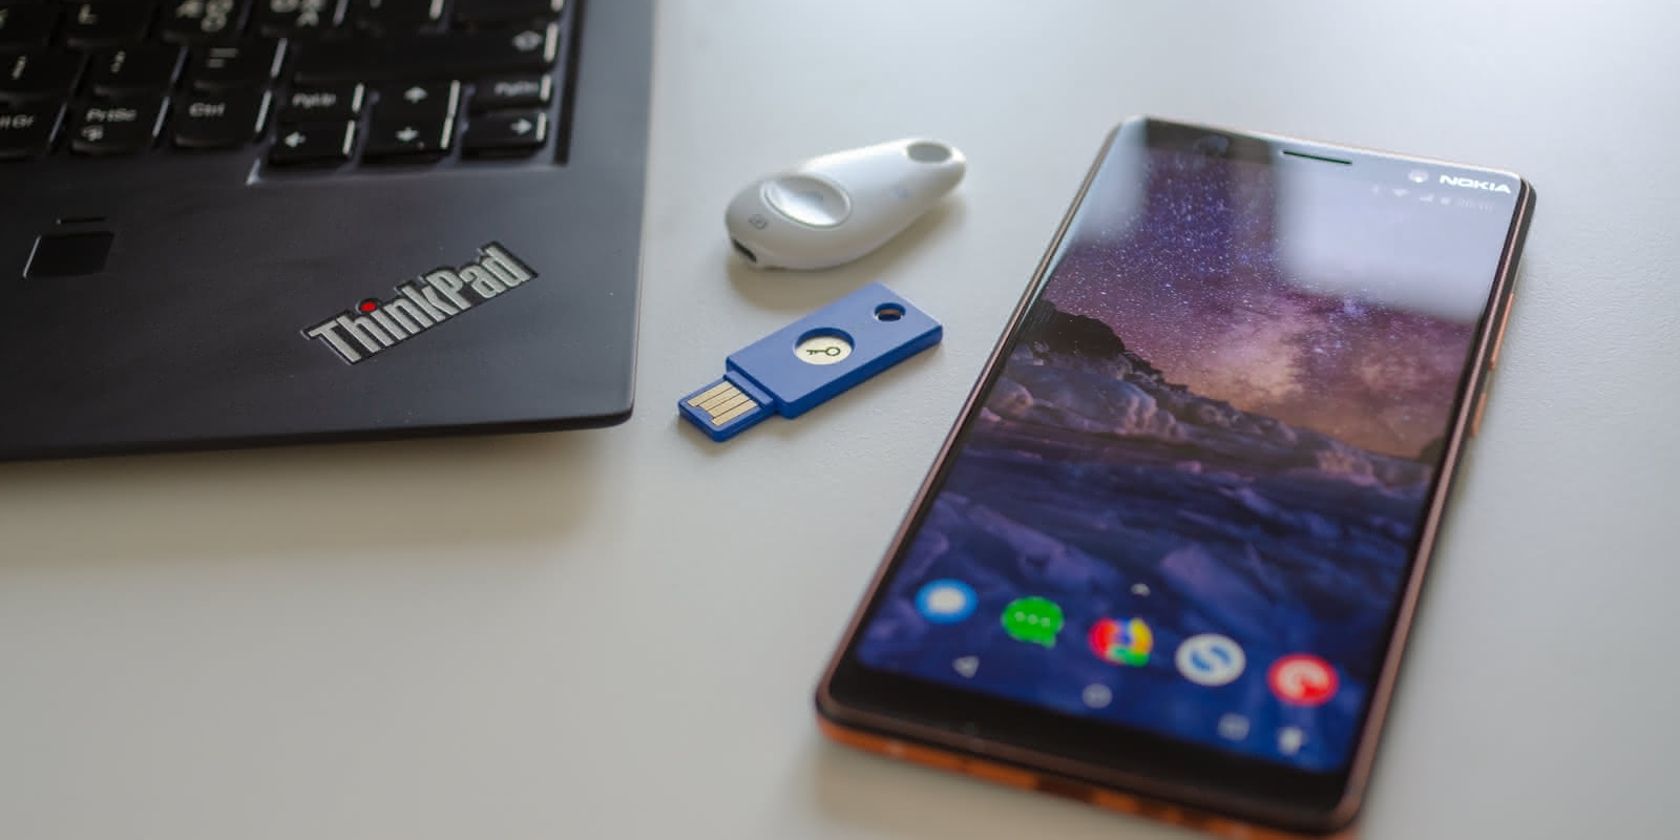 yubikey with phone and laptop